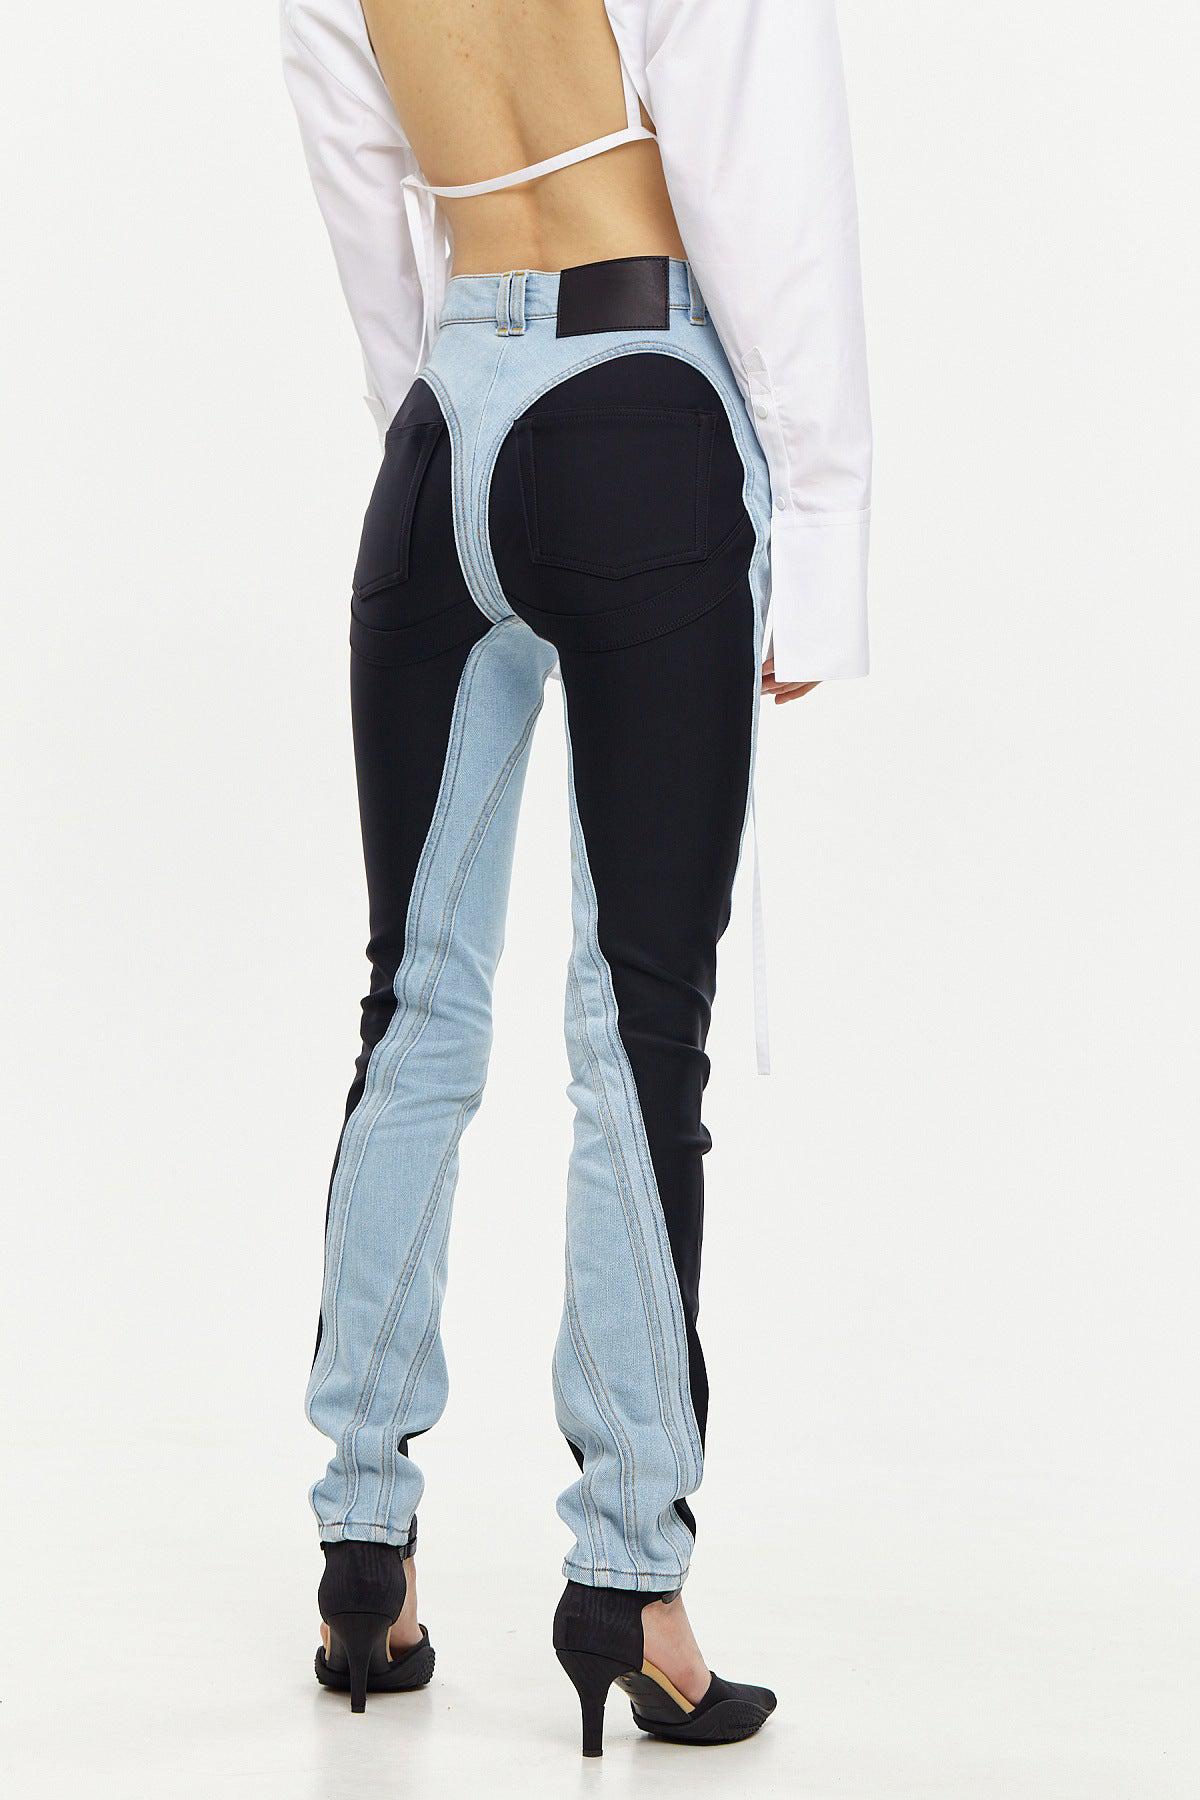 Dream Architect Stretch Giant Skinny Jeans iYoowe DropShipping